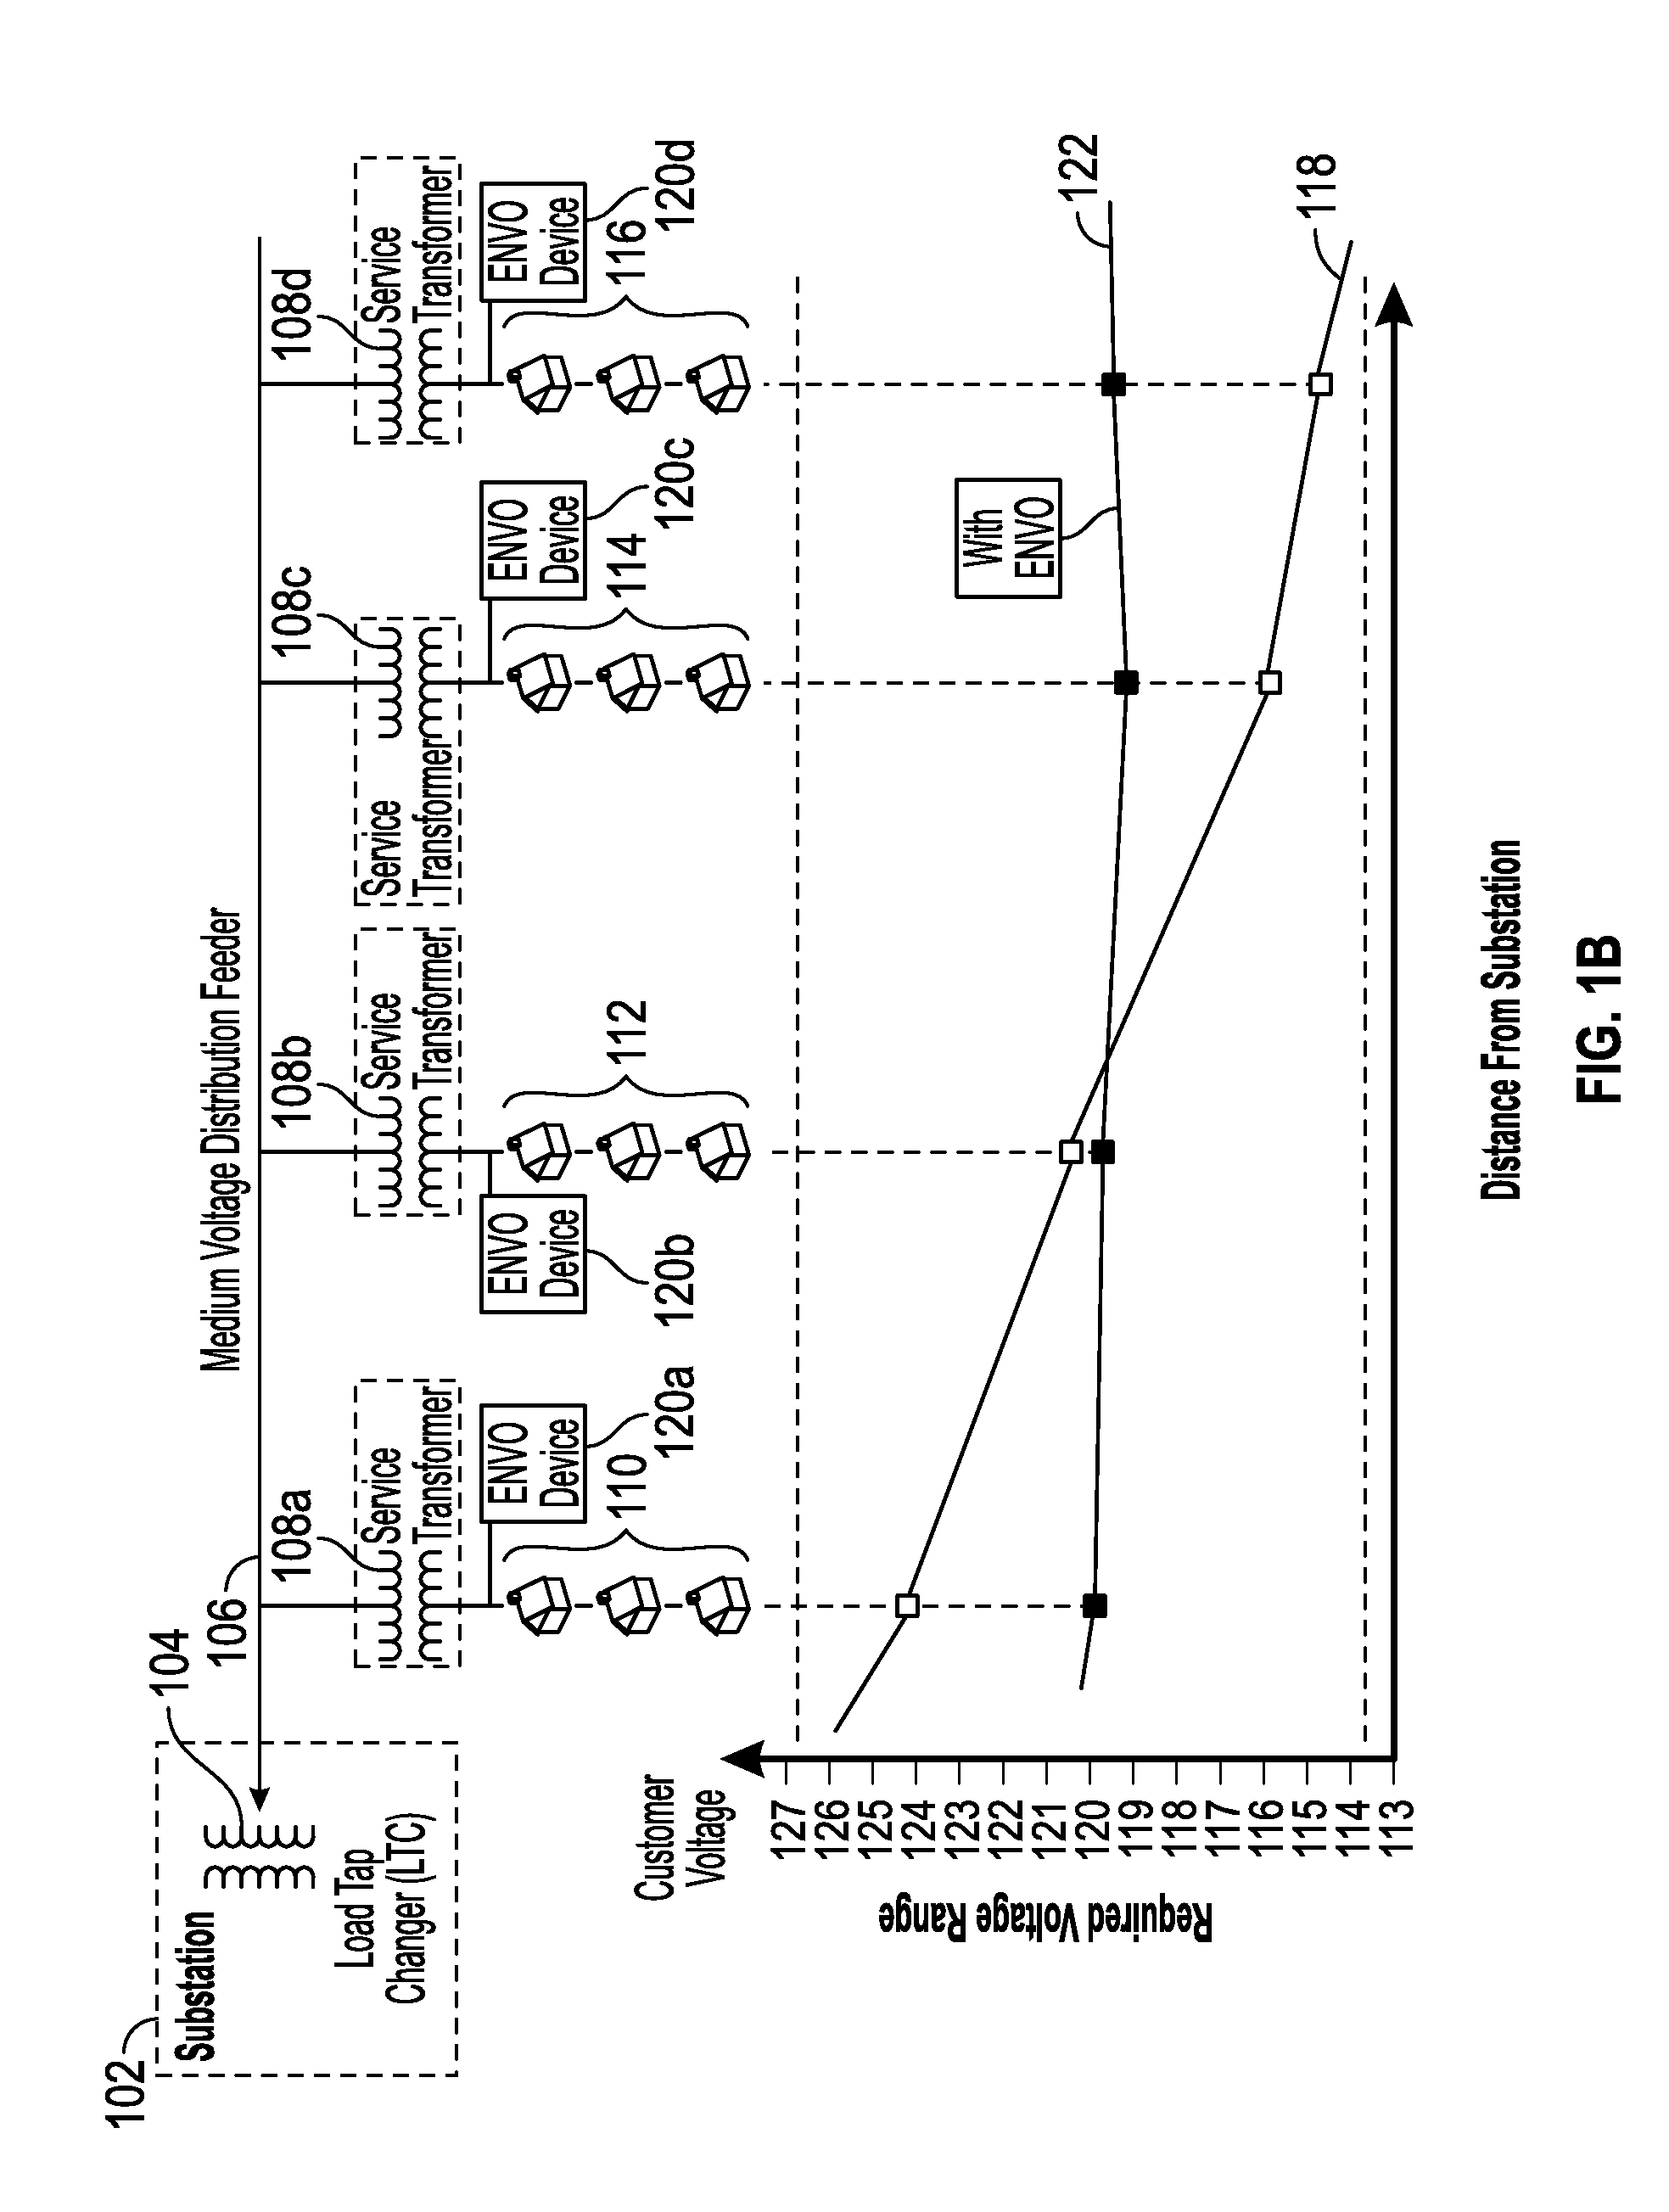 Systems and Methods for Switch-Controlled VAR Sources Coupled to a Power Grid